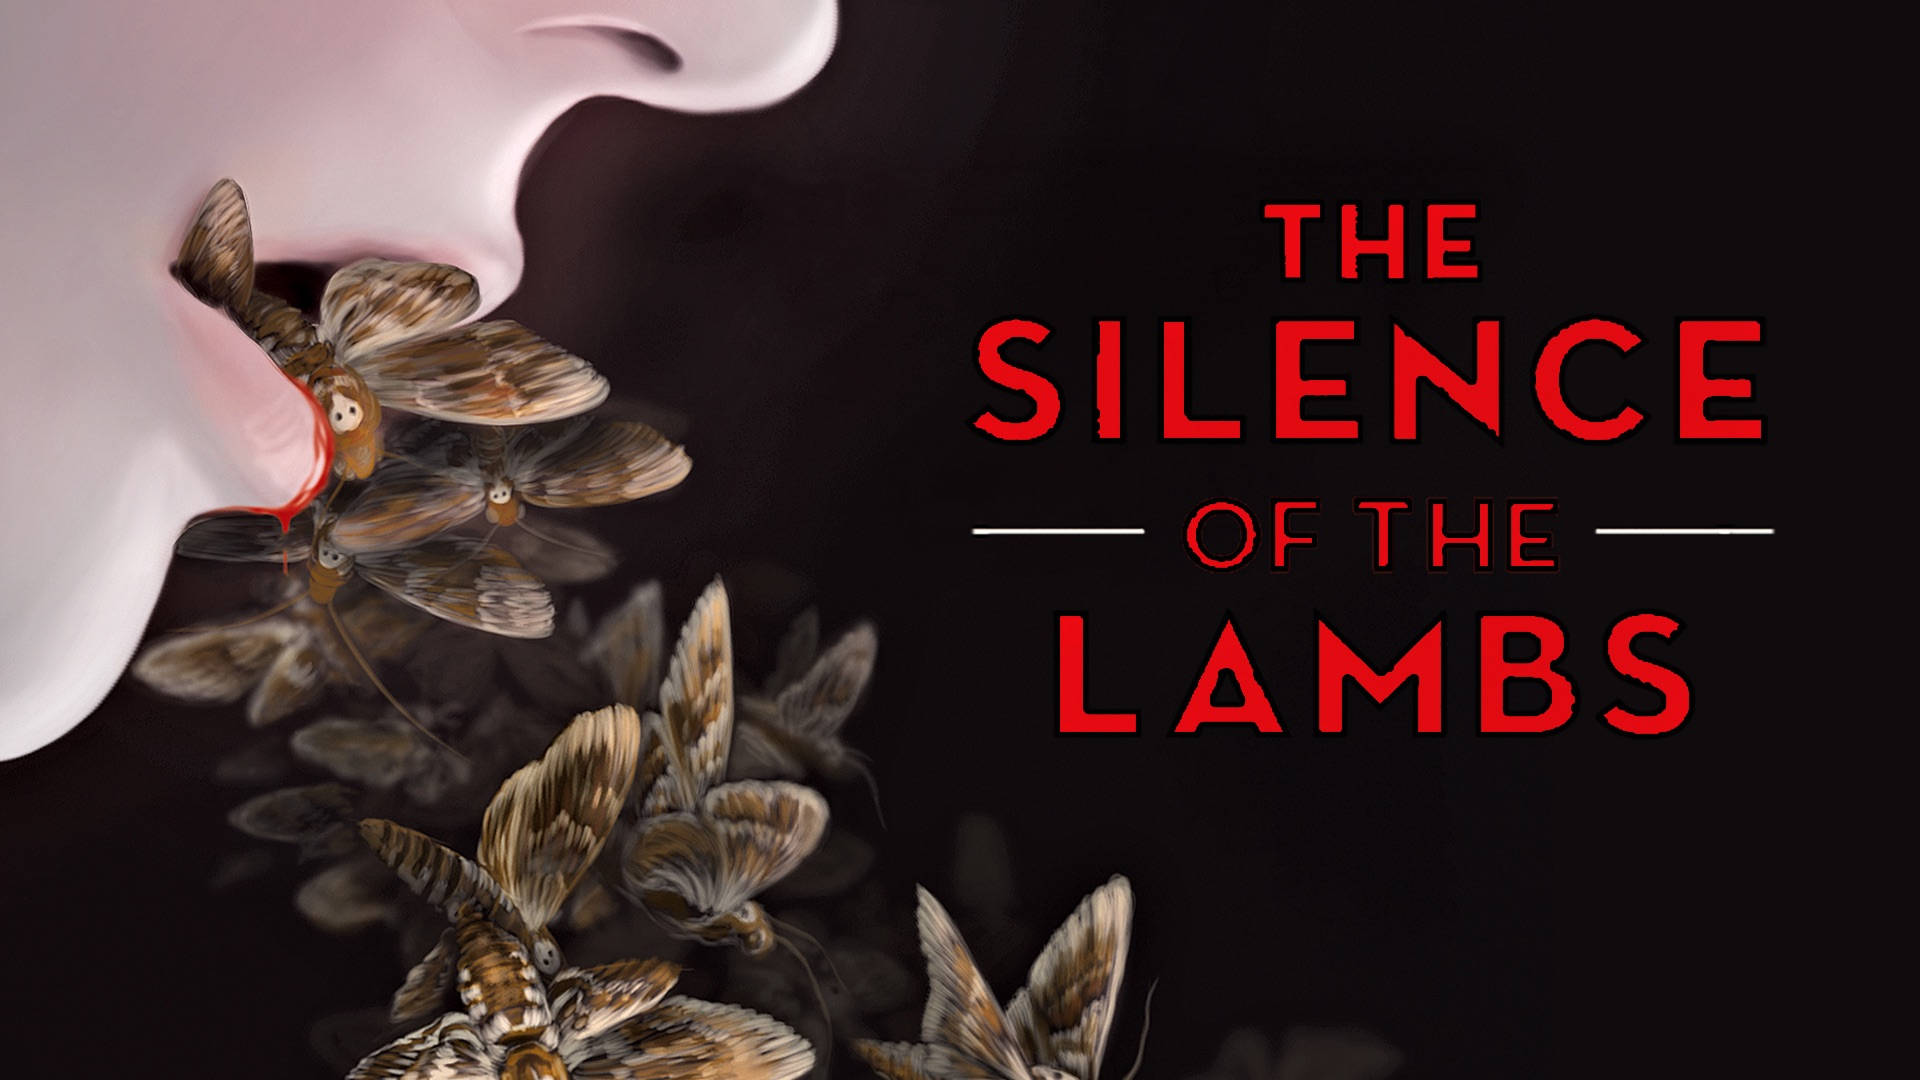 The Silence Of The Lambs Painted Poster Wallpaper